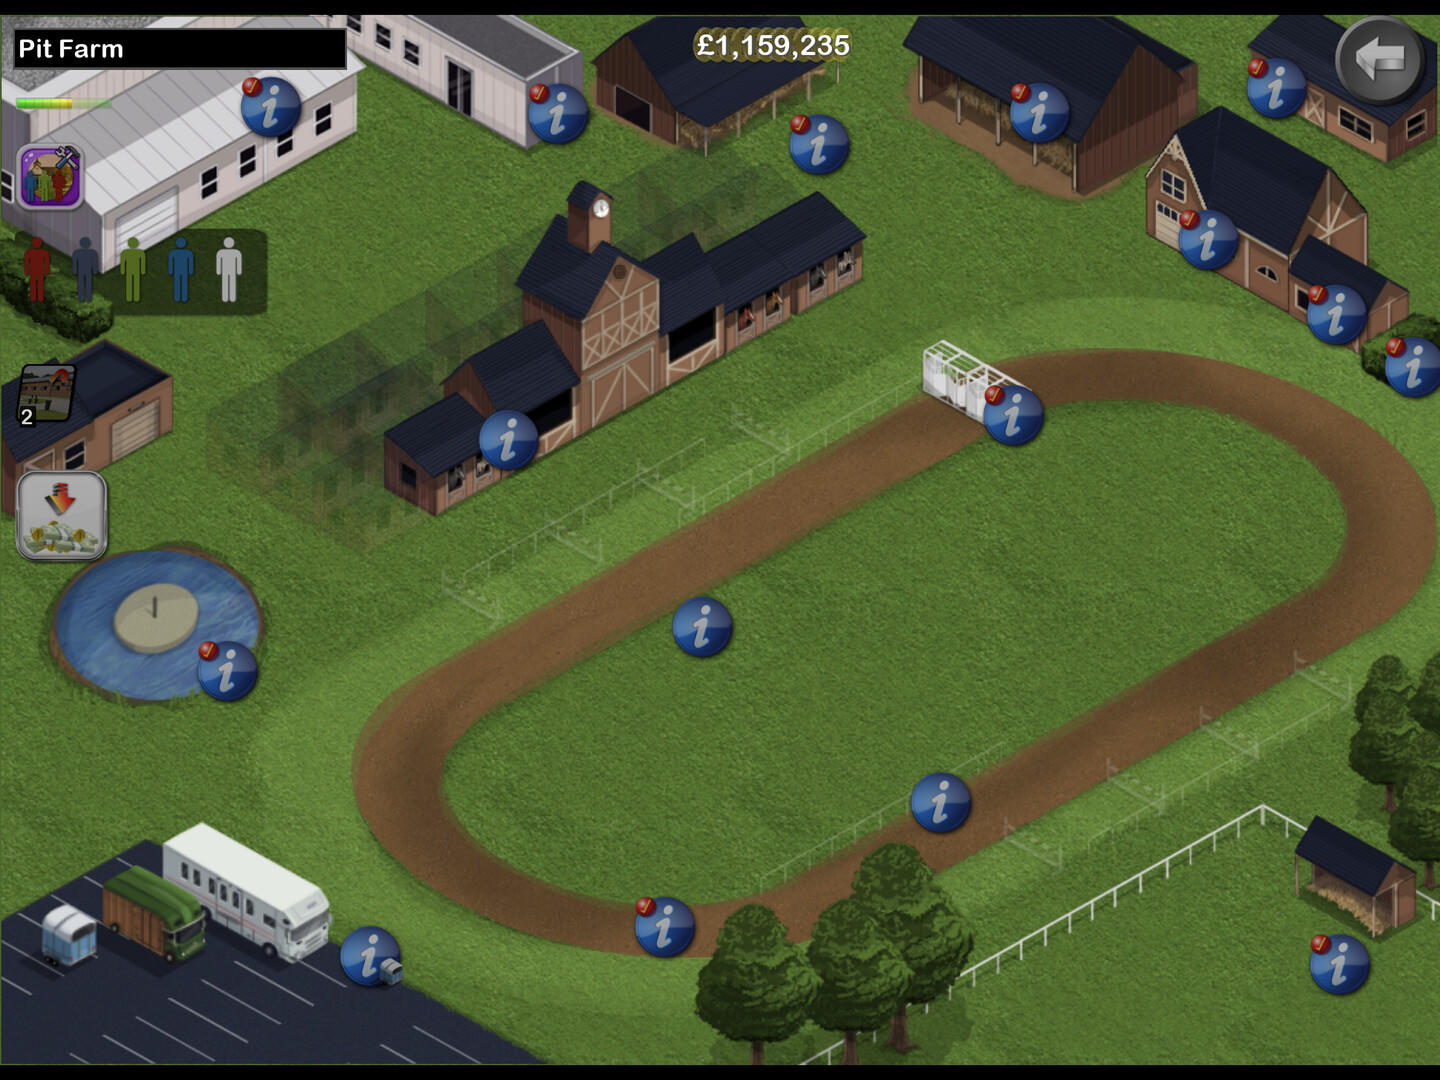 Starters Orders Touch Horse Racing screenshot game